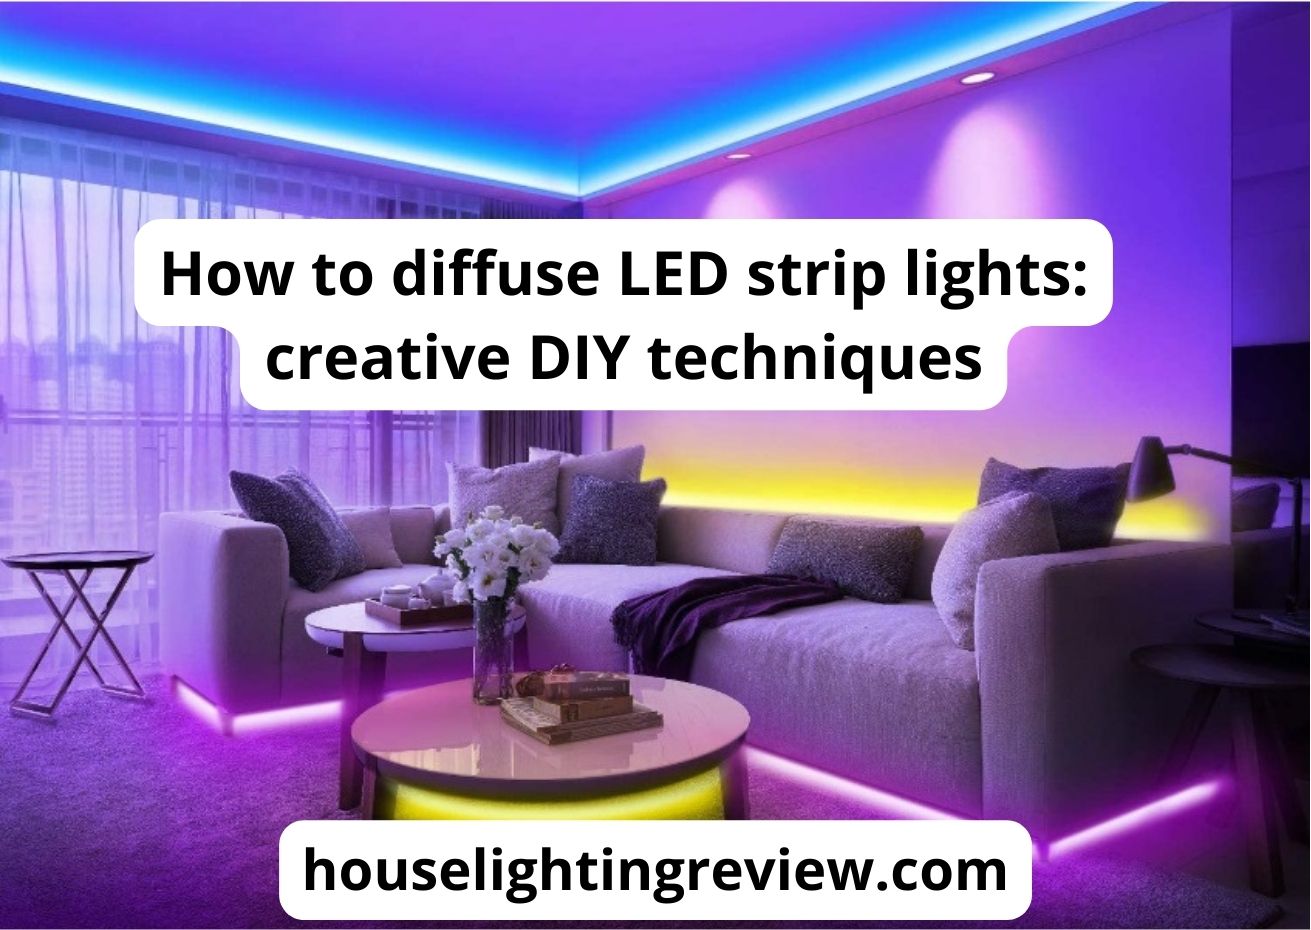 How to diffuse LED strip? Read the best and most helpful guide